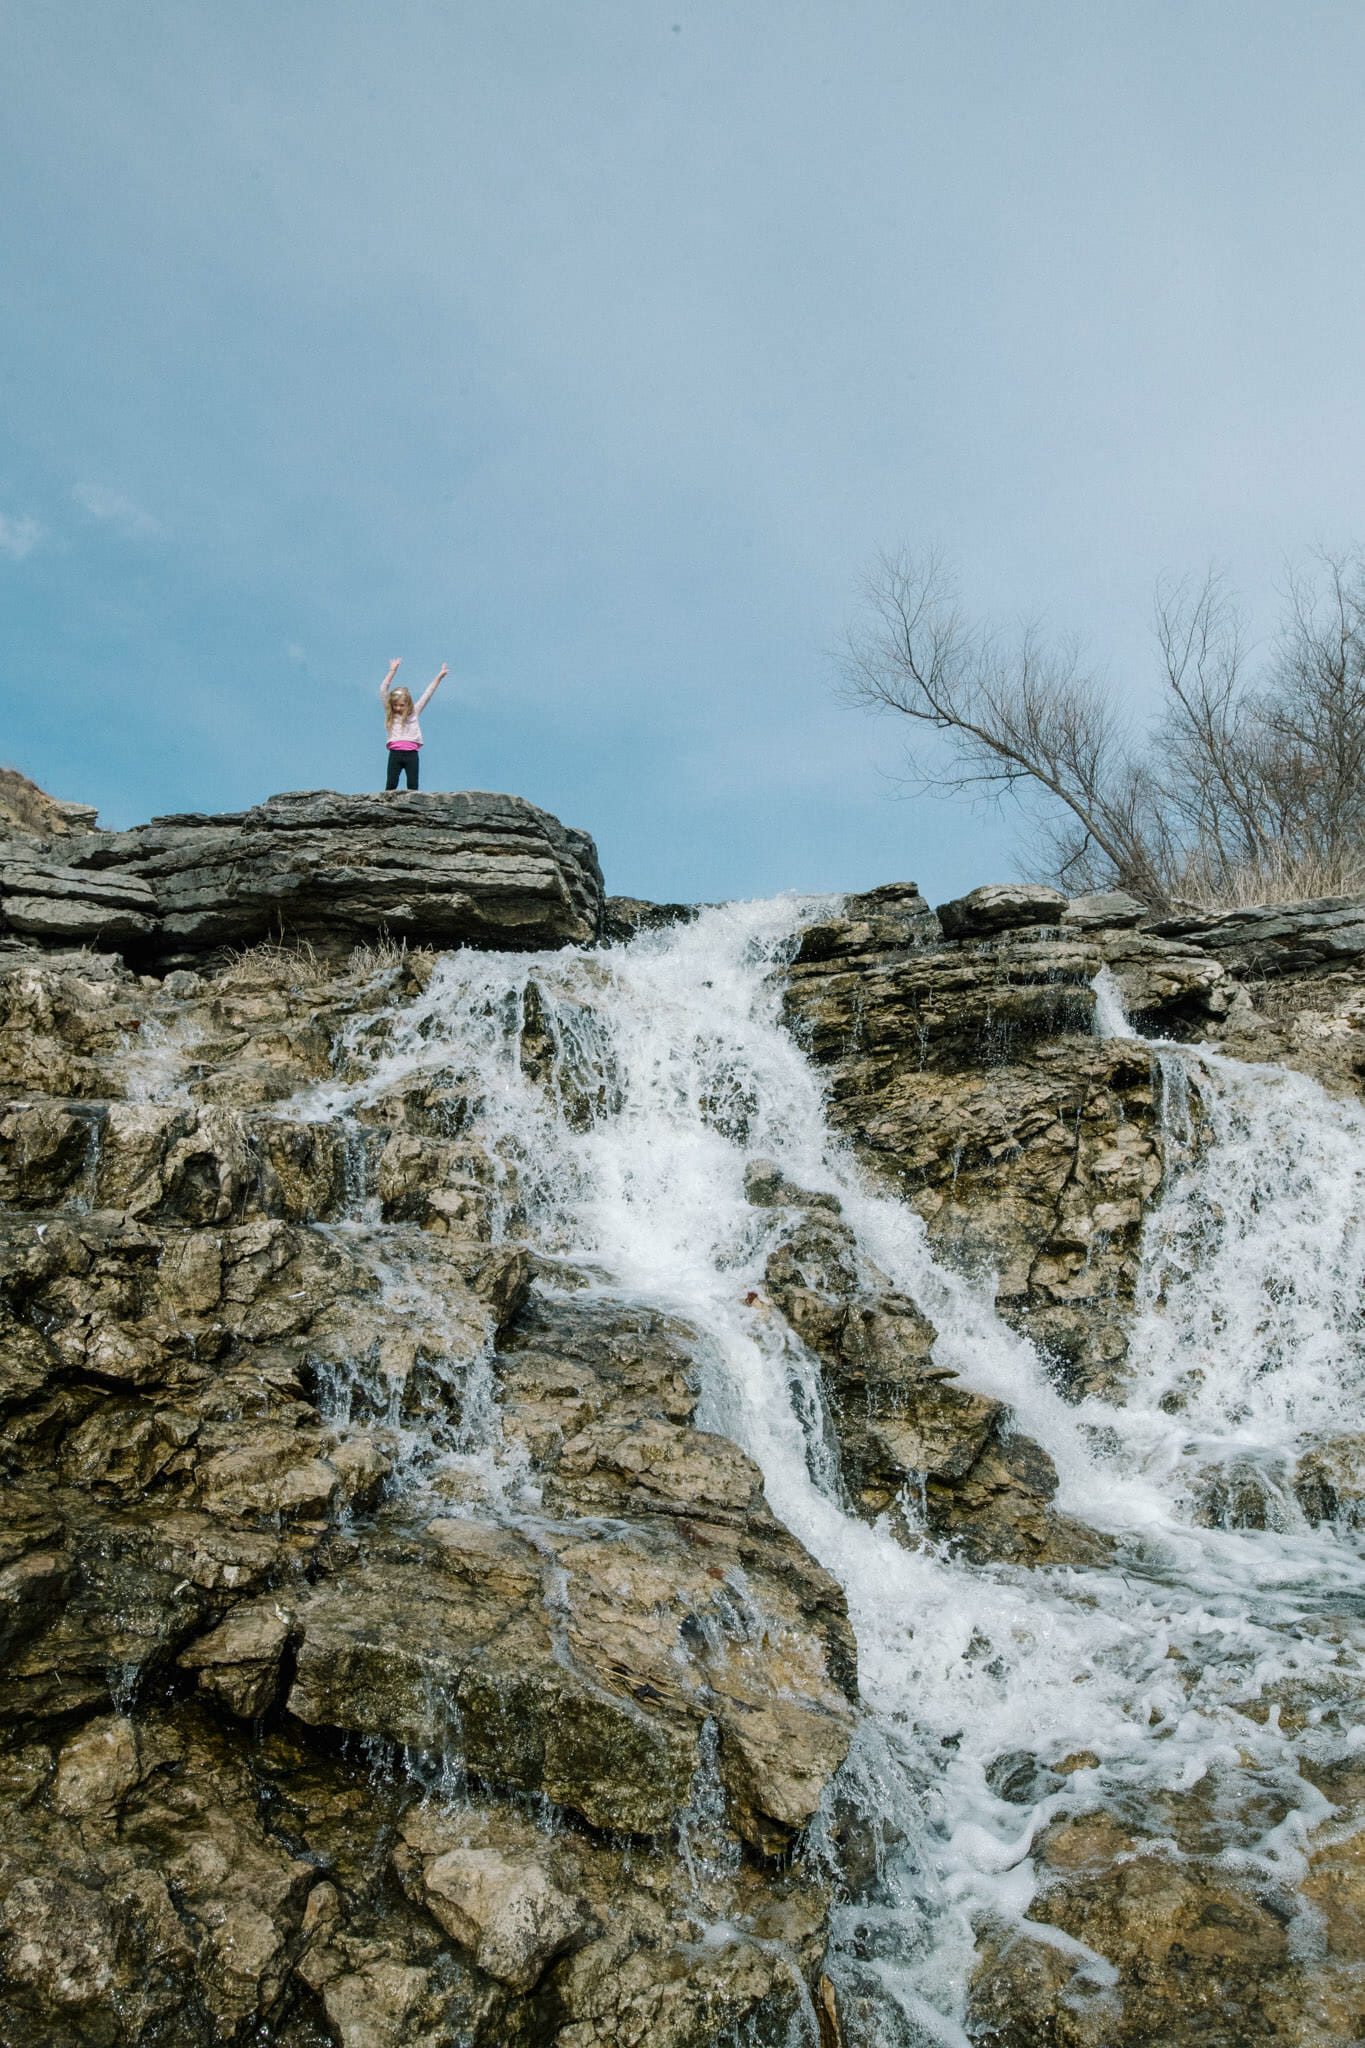 Gwen Meyer standing on top of a waterfall